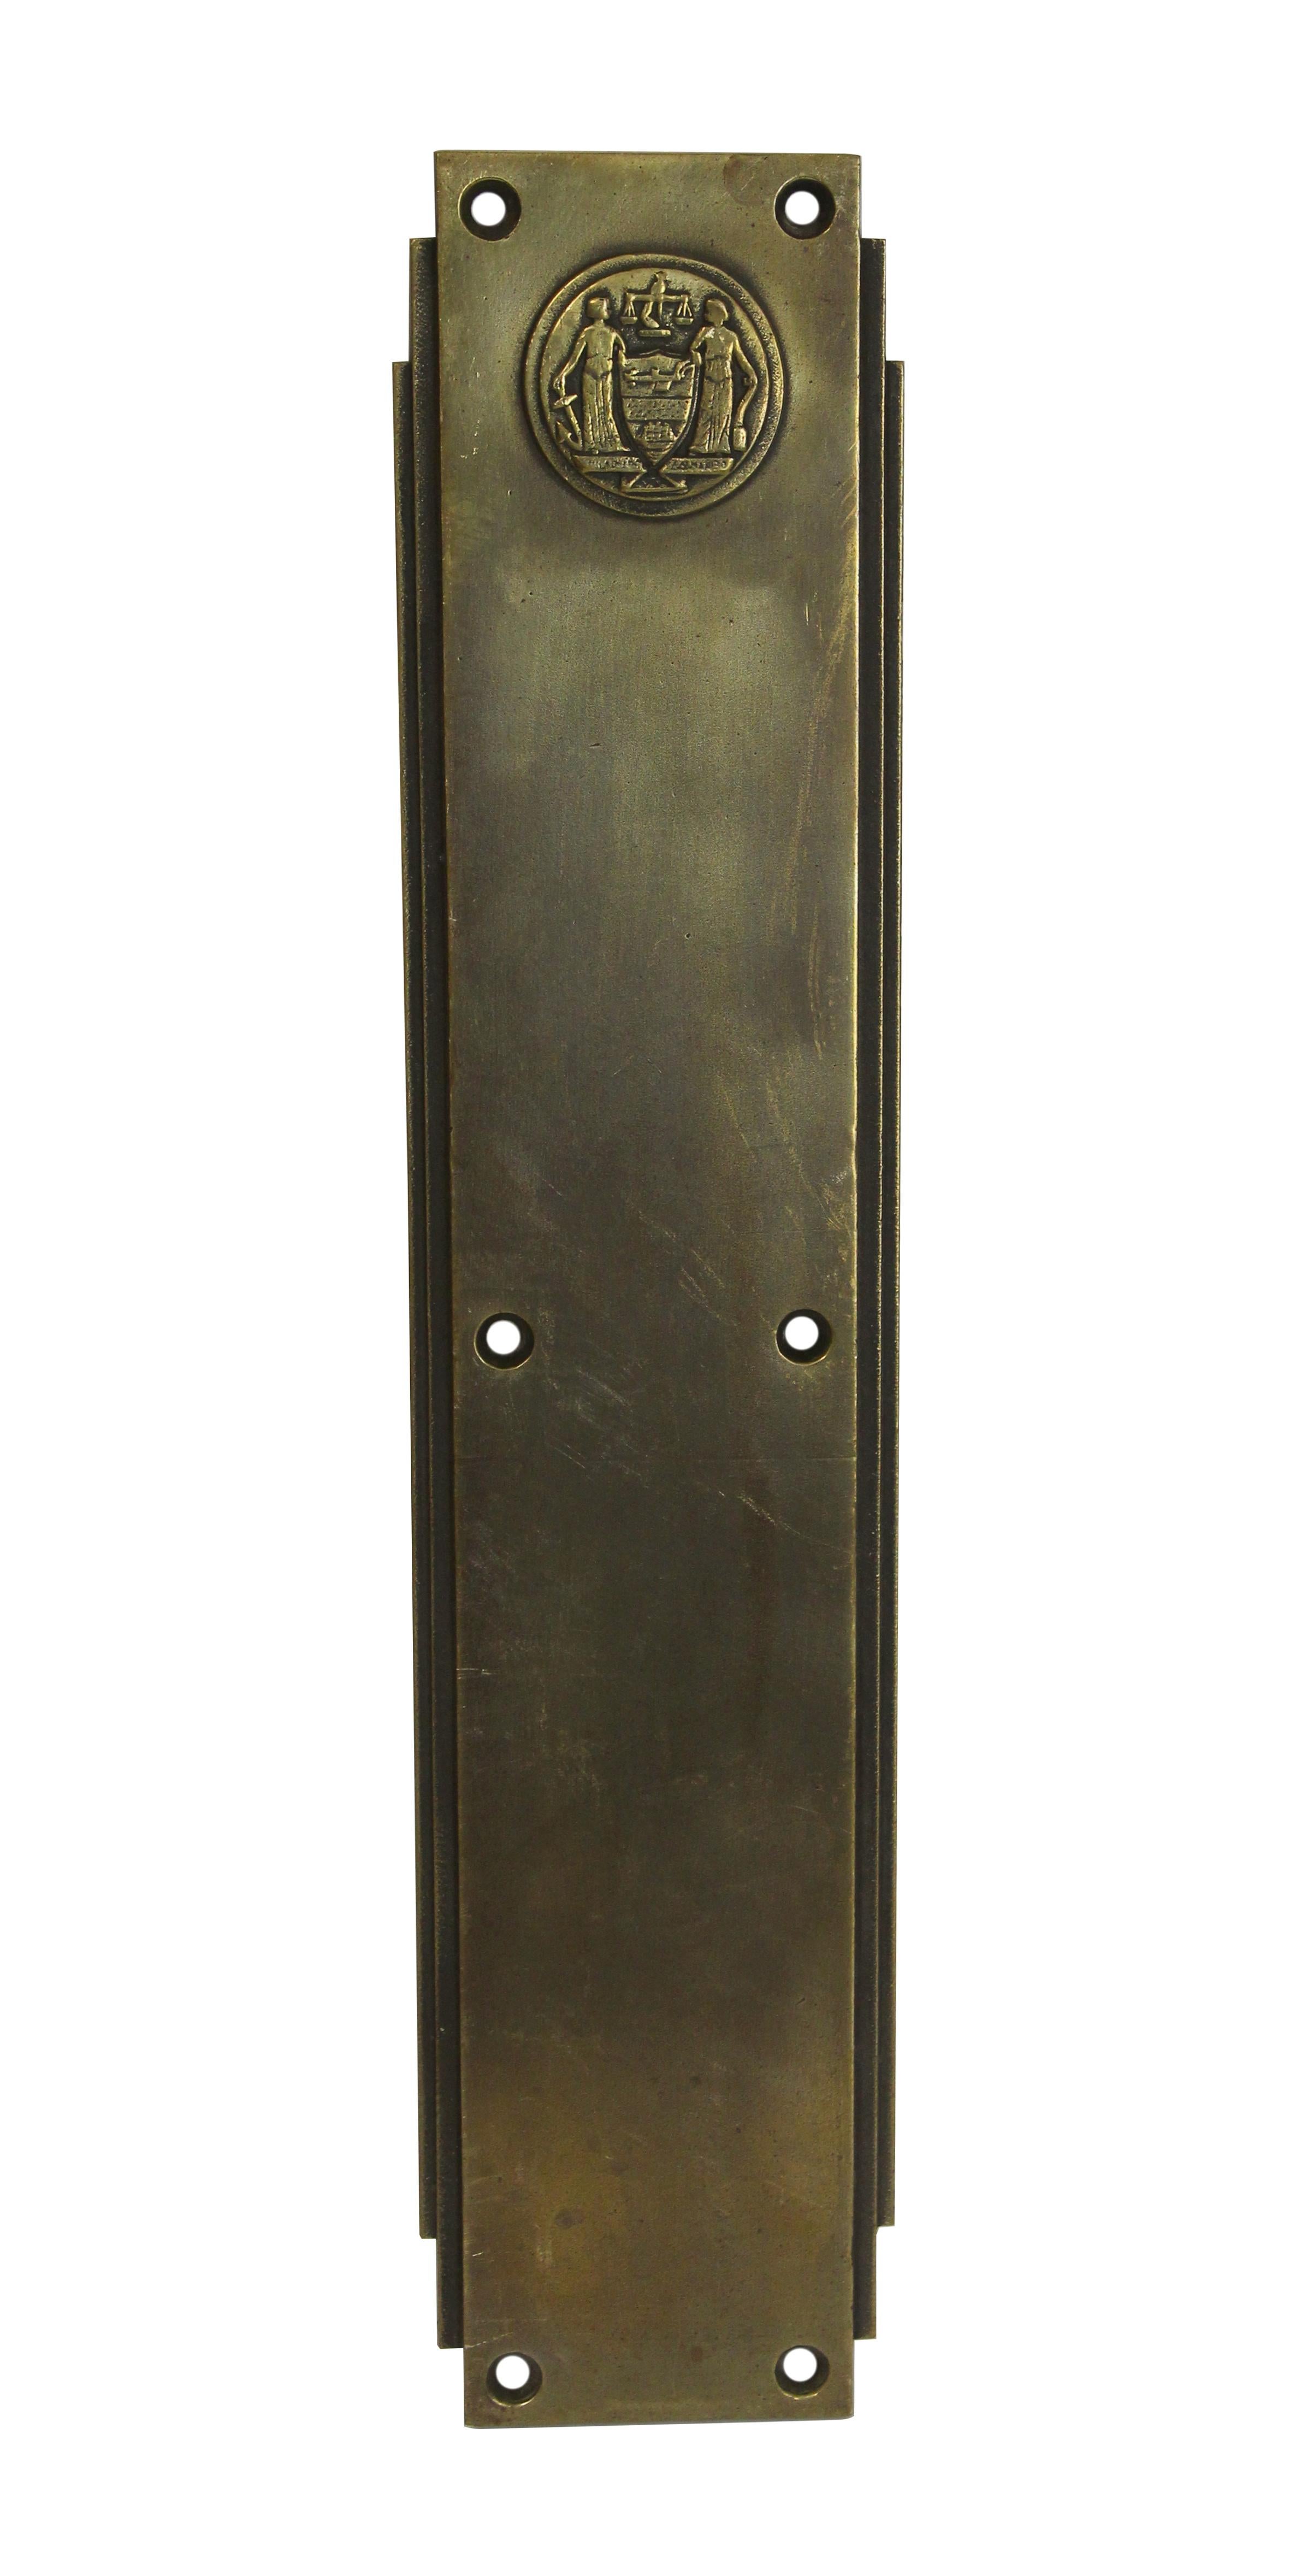 1931 pair of Corbin signed bronze push plates with emblems salvaged from the Philadelphia Civic Center. This pair is made for the front and back of one swinging door. Salvaged by Olde Good Things from The Philadelphia Civic Center in 2005. Priced